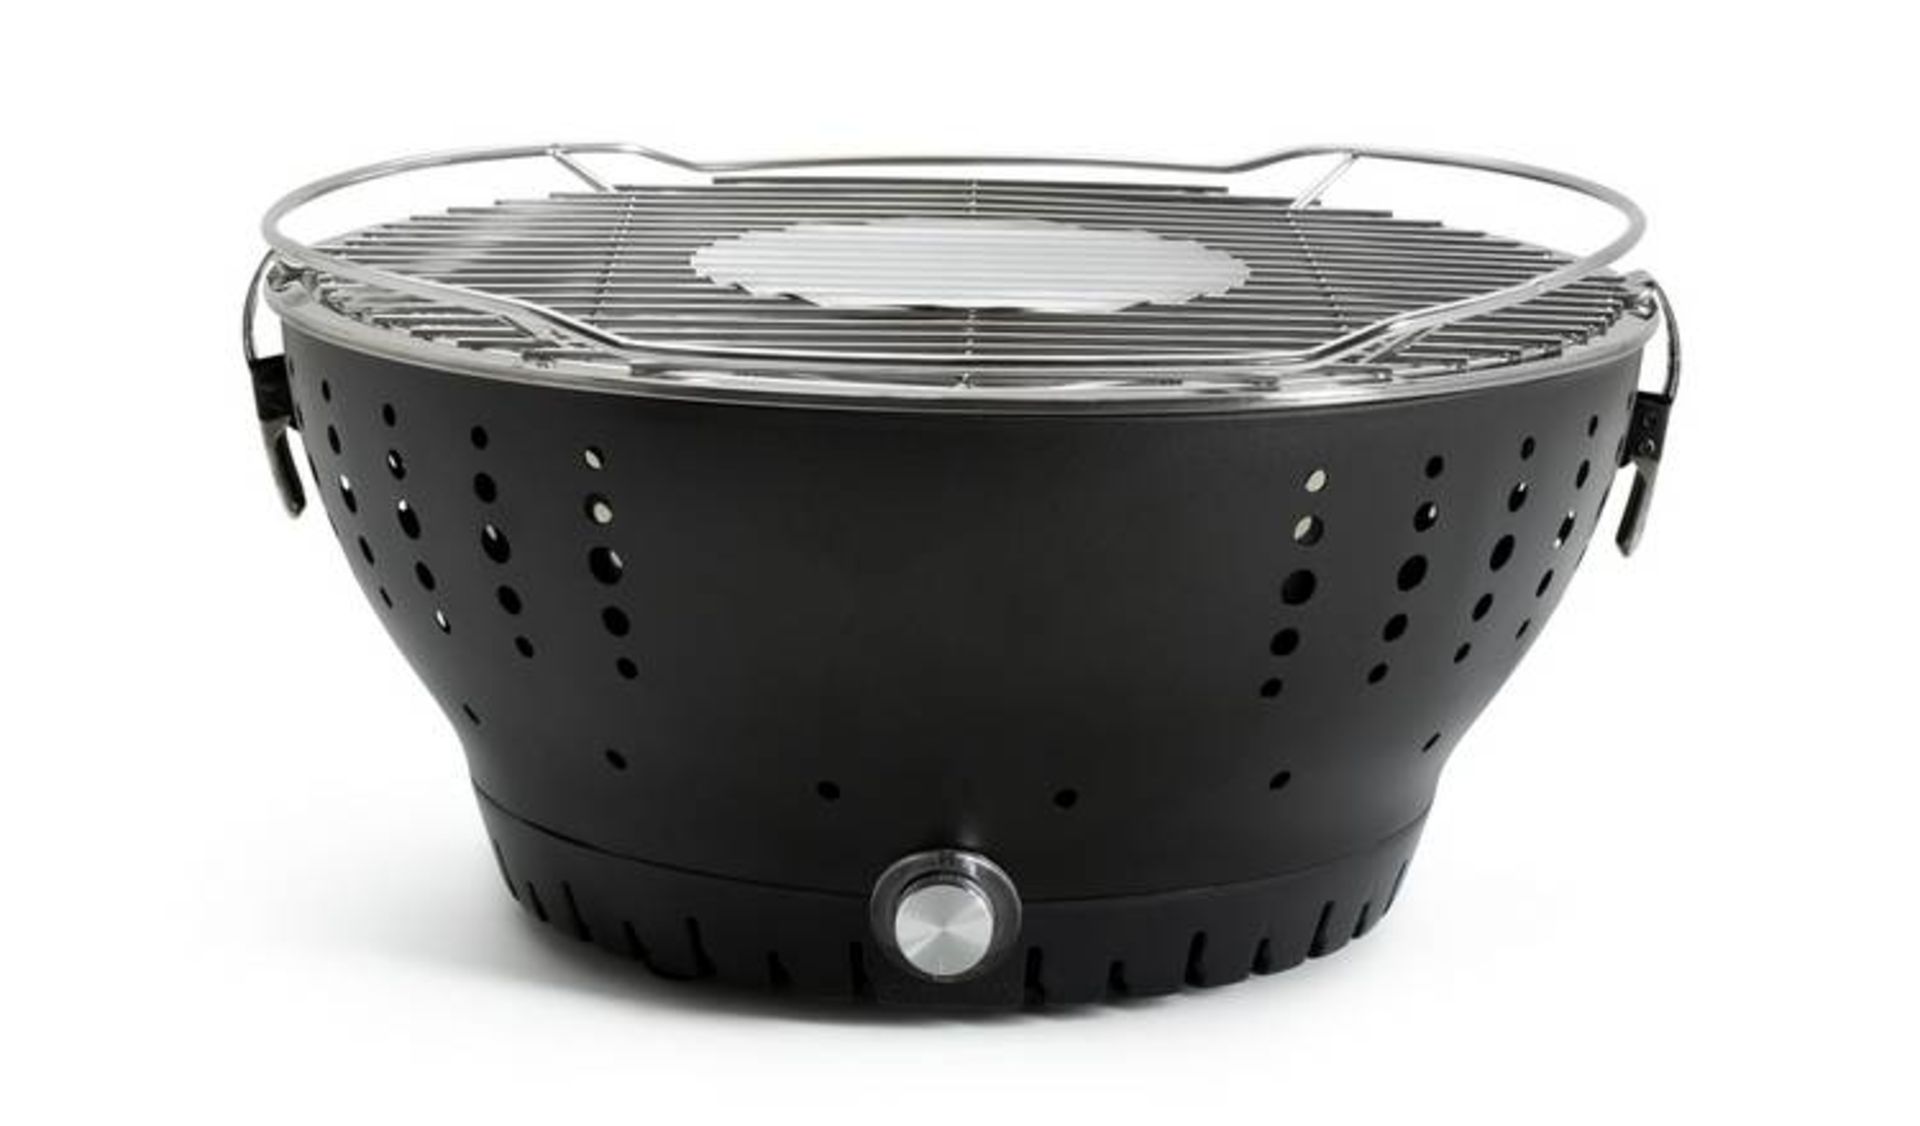 TRADE LOT 15 X BRAND NEW 38CM PREMIUM CHARCOAL BBQ WITH BUILT IN FANS RRP £89 EACH